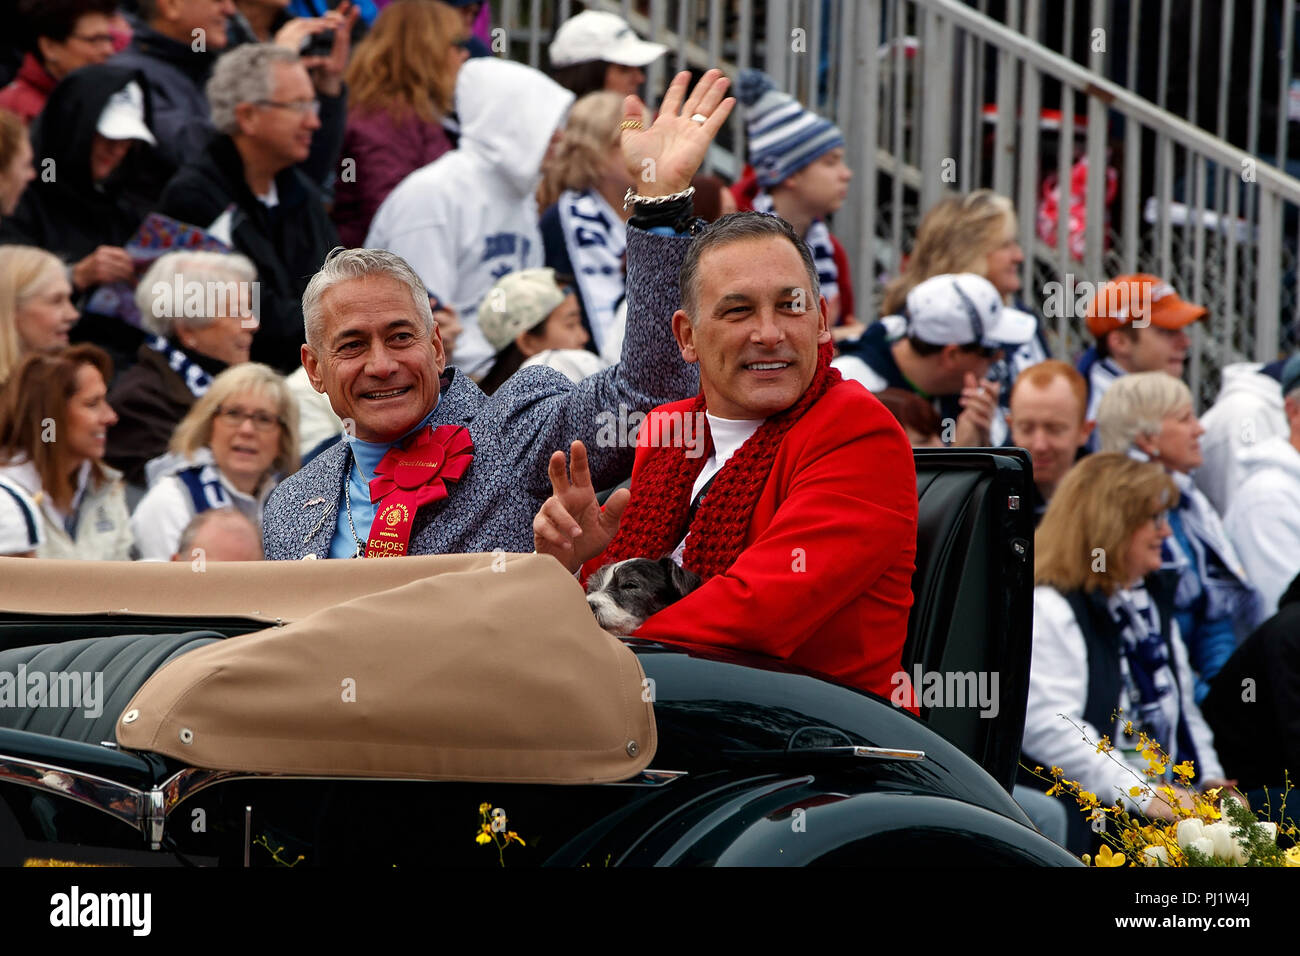 Greg Louganis and his husband Johnny Chaillot on the parade route of the 2017 Tournament of Roses Parade, Rose Parade, Pasadena, California, United States of America Stock Photo